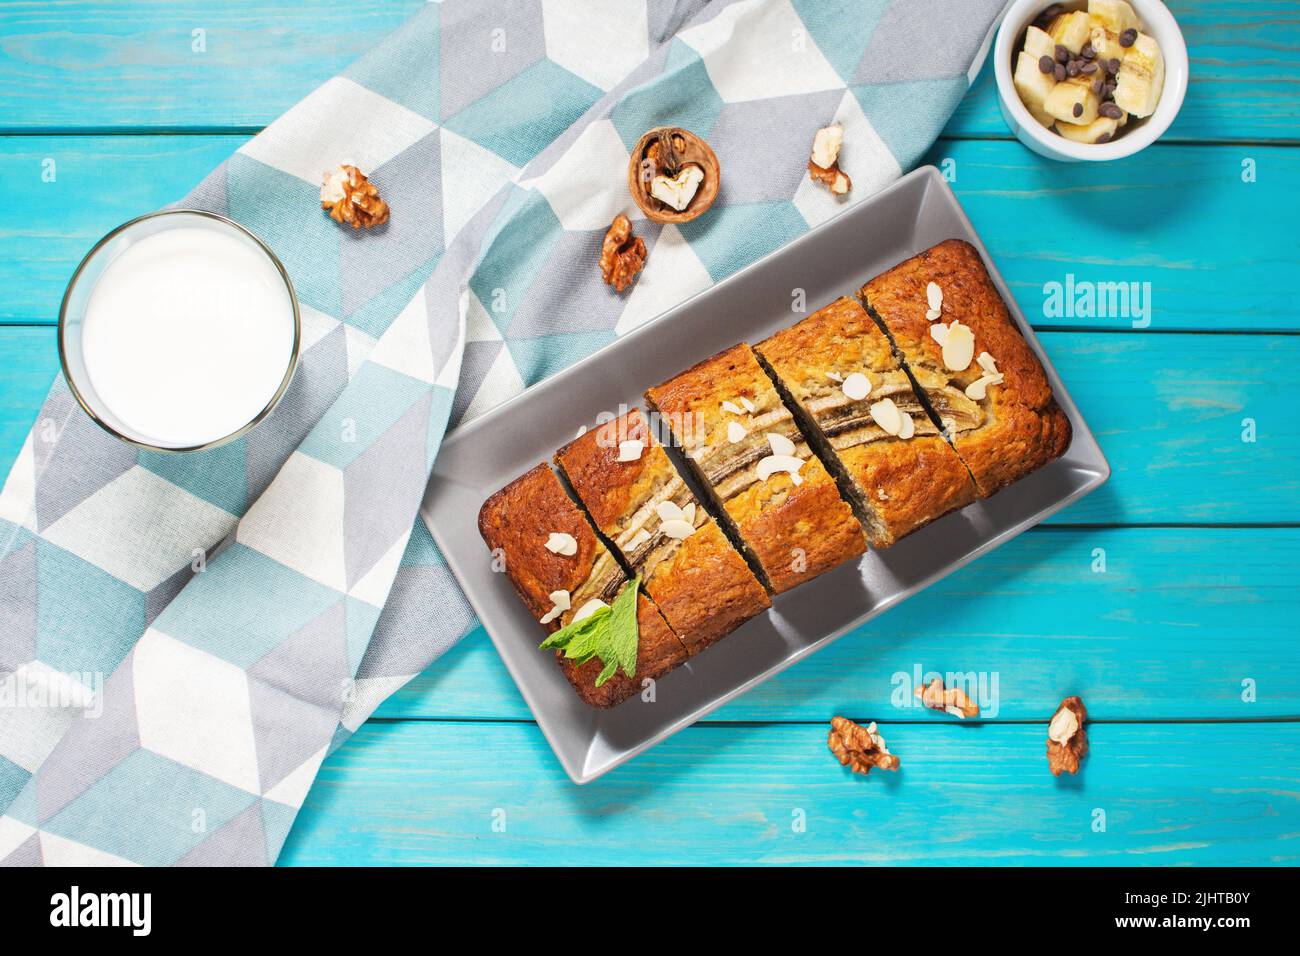 Banana bread or cake on blue wooden table. Delicious homemade dessert, tasty snack or morning breakfast. Top view Stock Photo